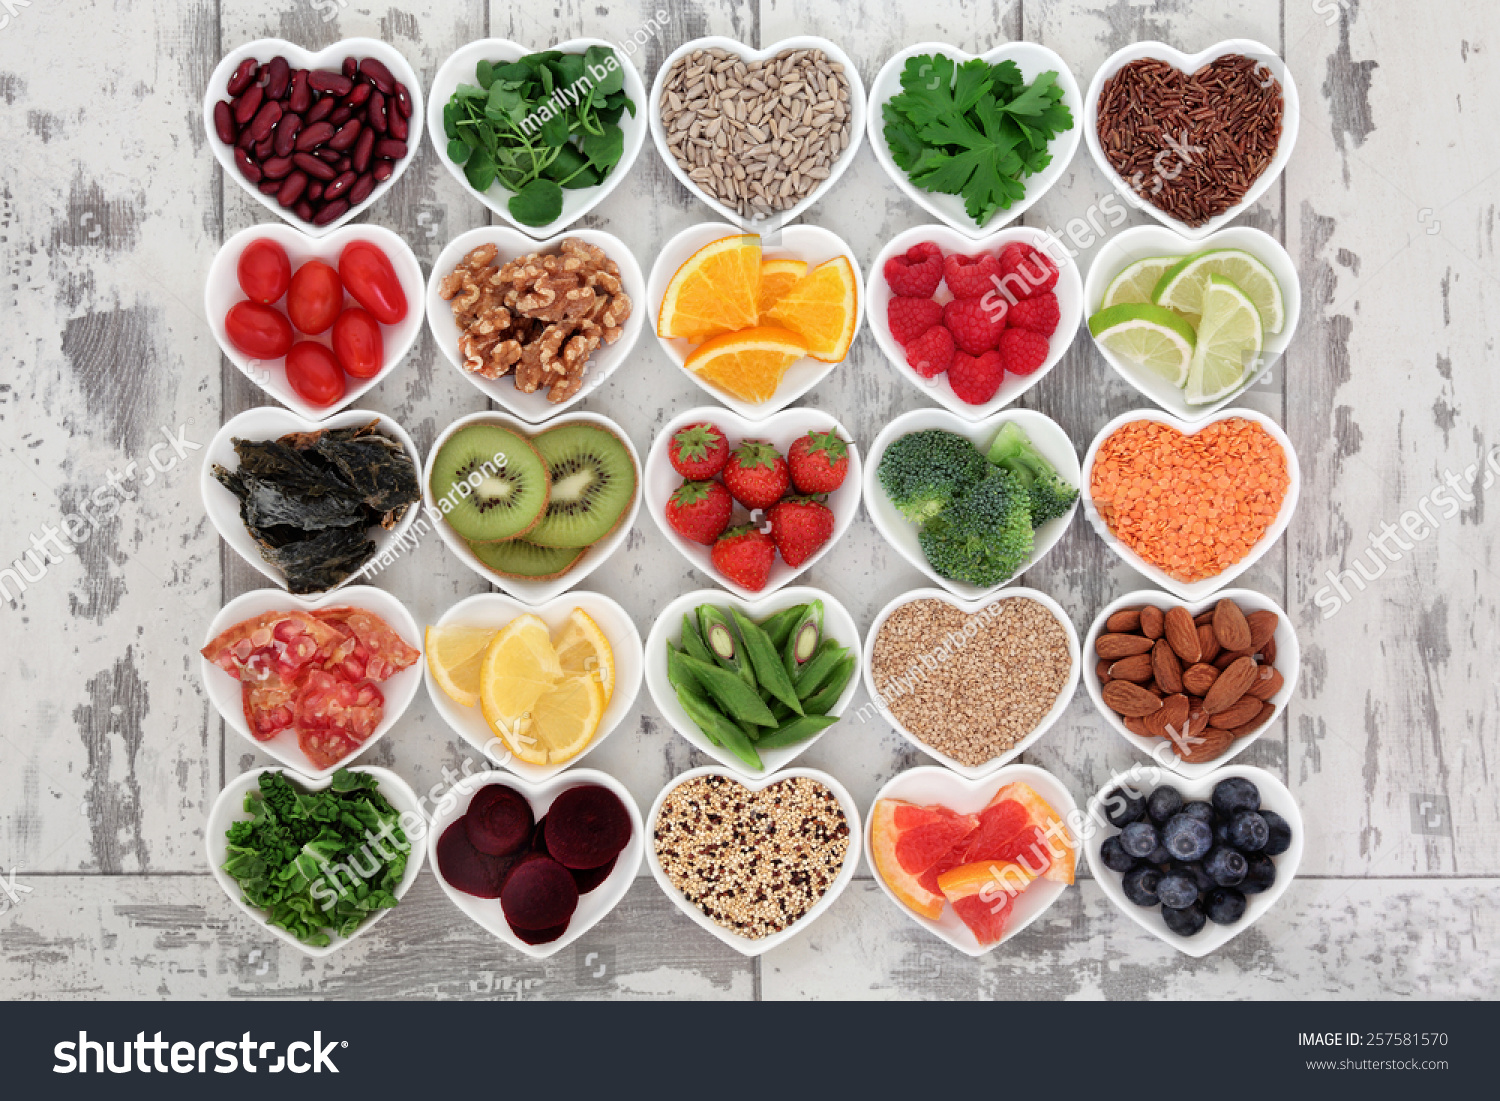 Diet detox super food & immune boosting food collection in heart shaped porcelain bowls over rustic wood background. Foods high in antioxidants, anthocaynins, omega 3, protein, vitamins & minerals.   #257581570